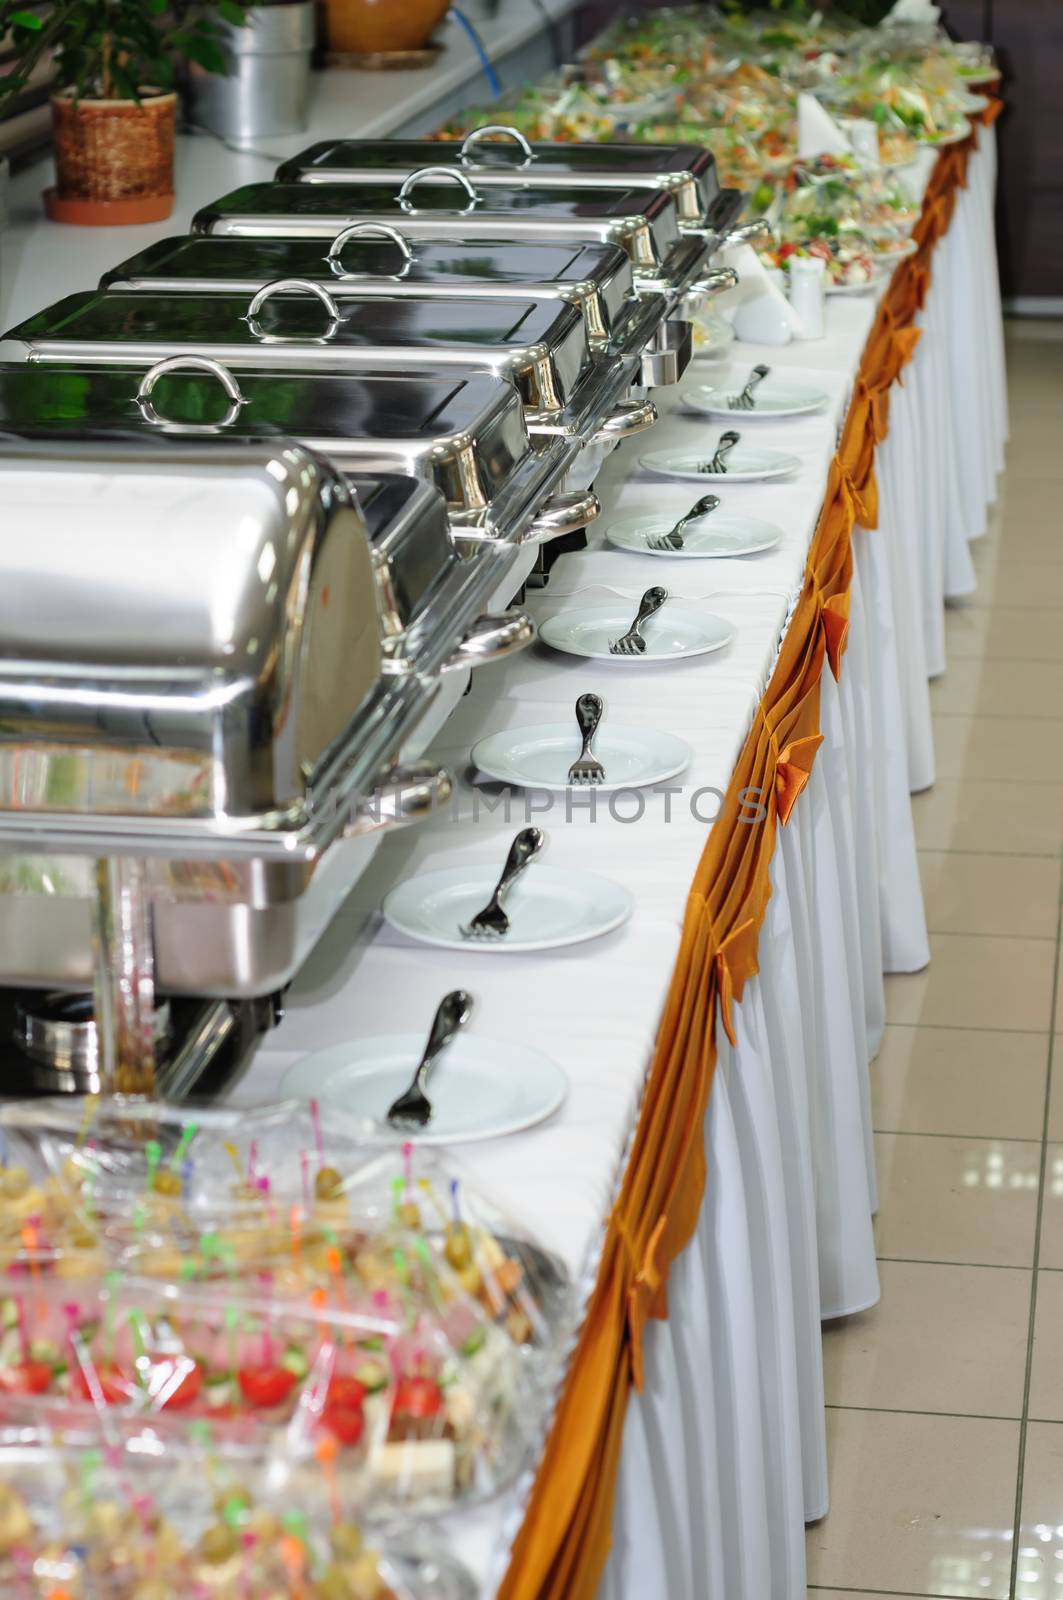 chafing dish heaters at the banquet table